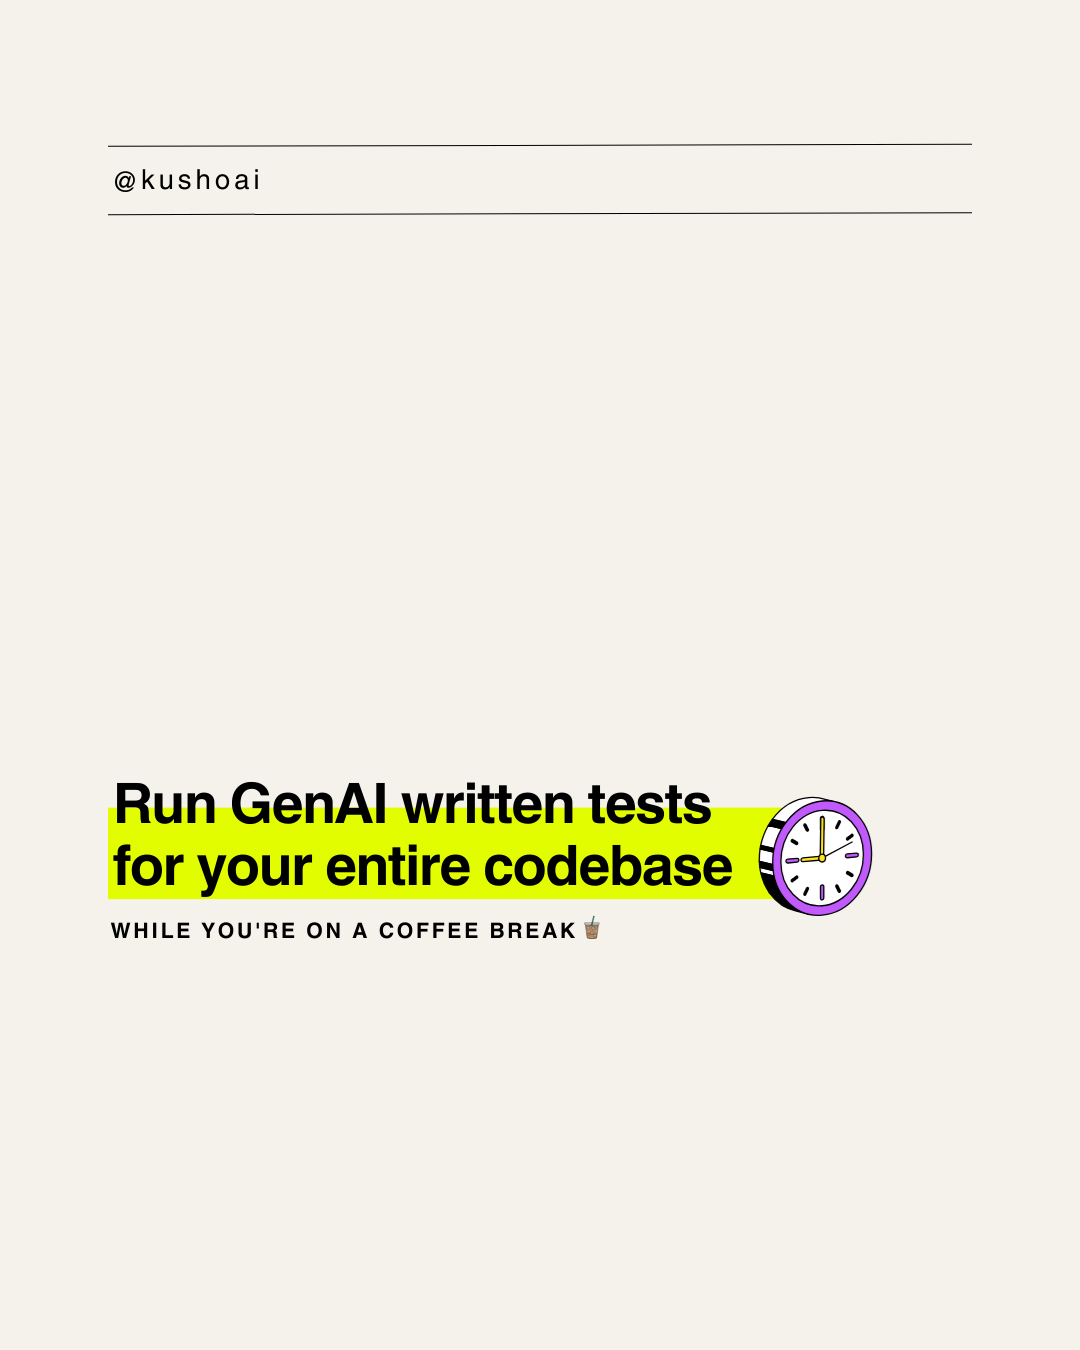 Test more efficiently with GenAI